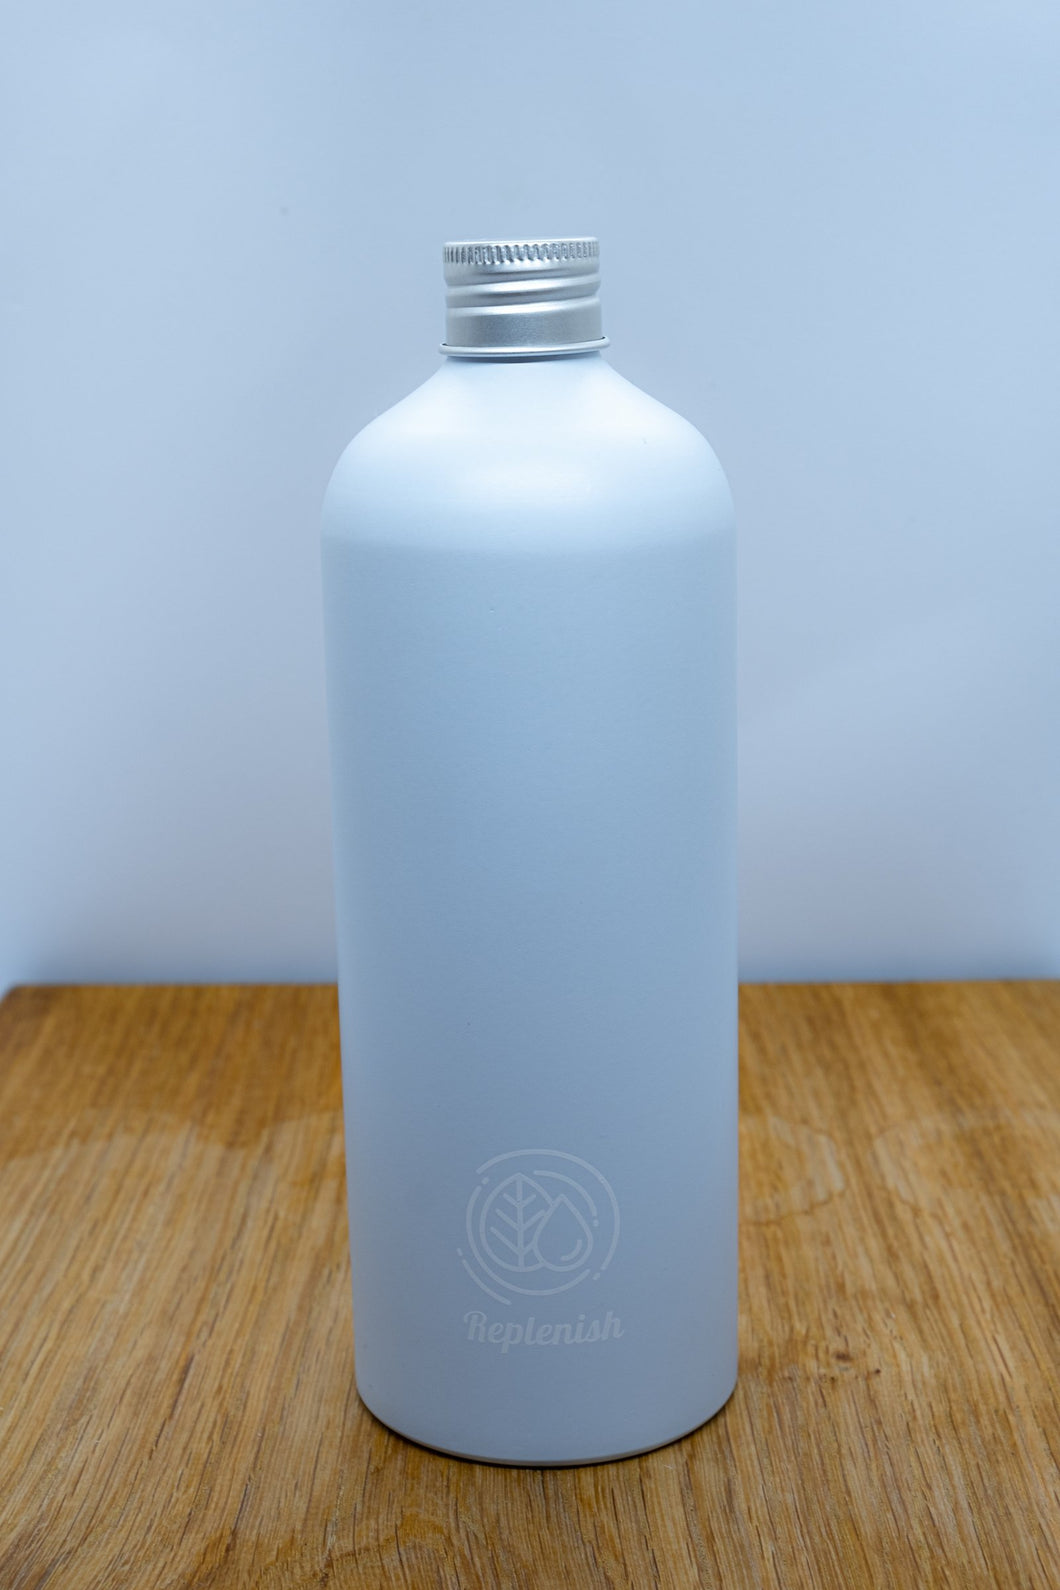 Replenish Bottle with Aluminium Screw Lid filled with 500ml of Miniml Cleaning & Laundry Product